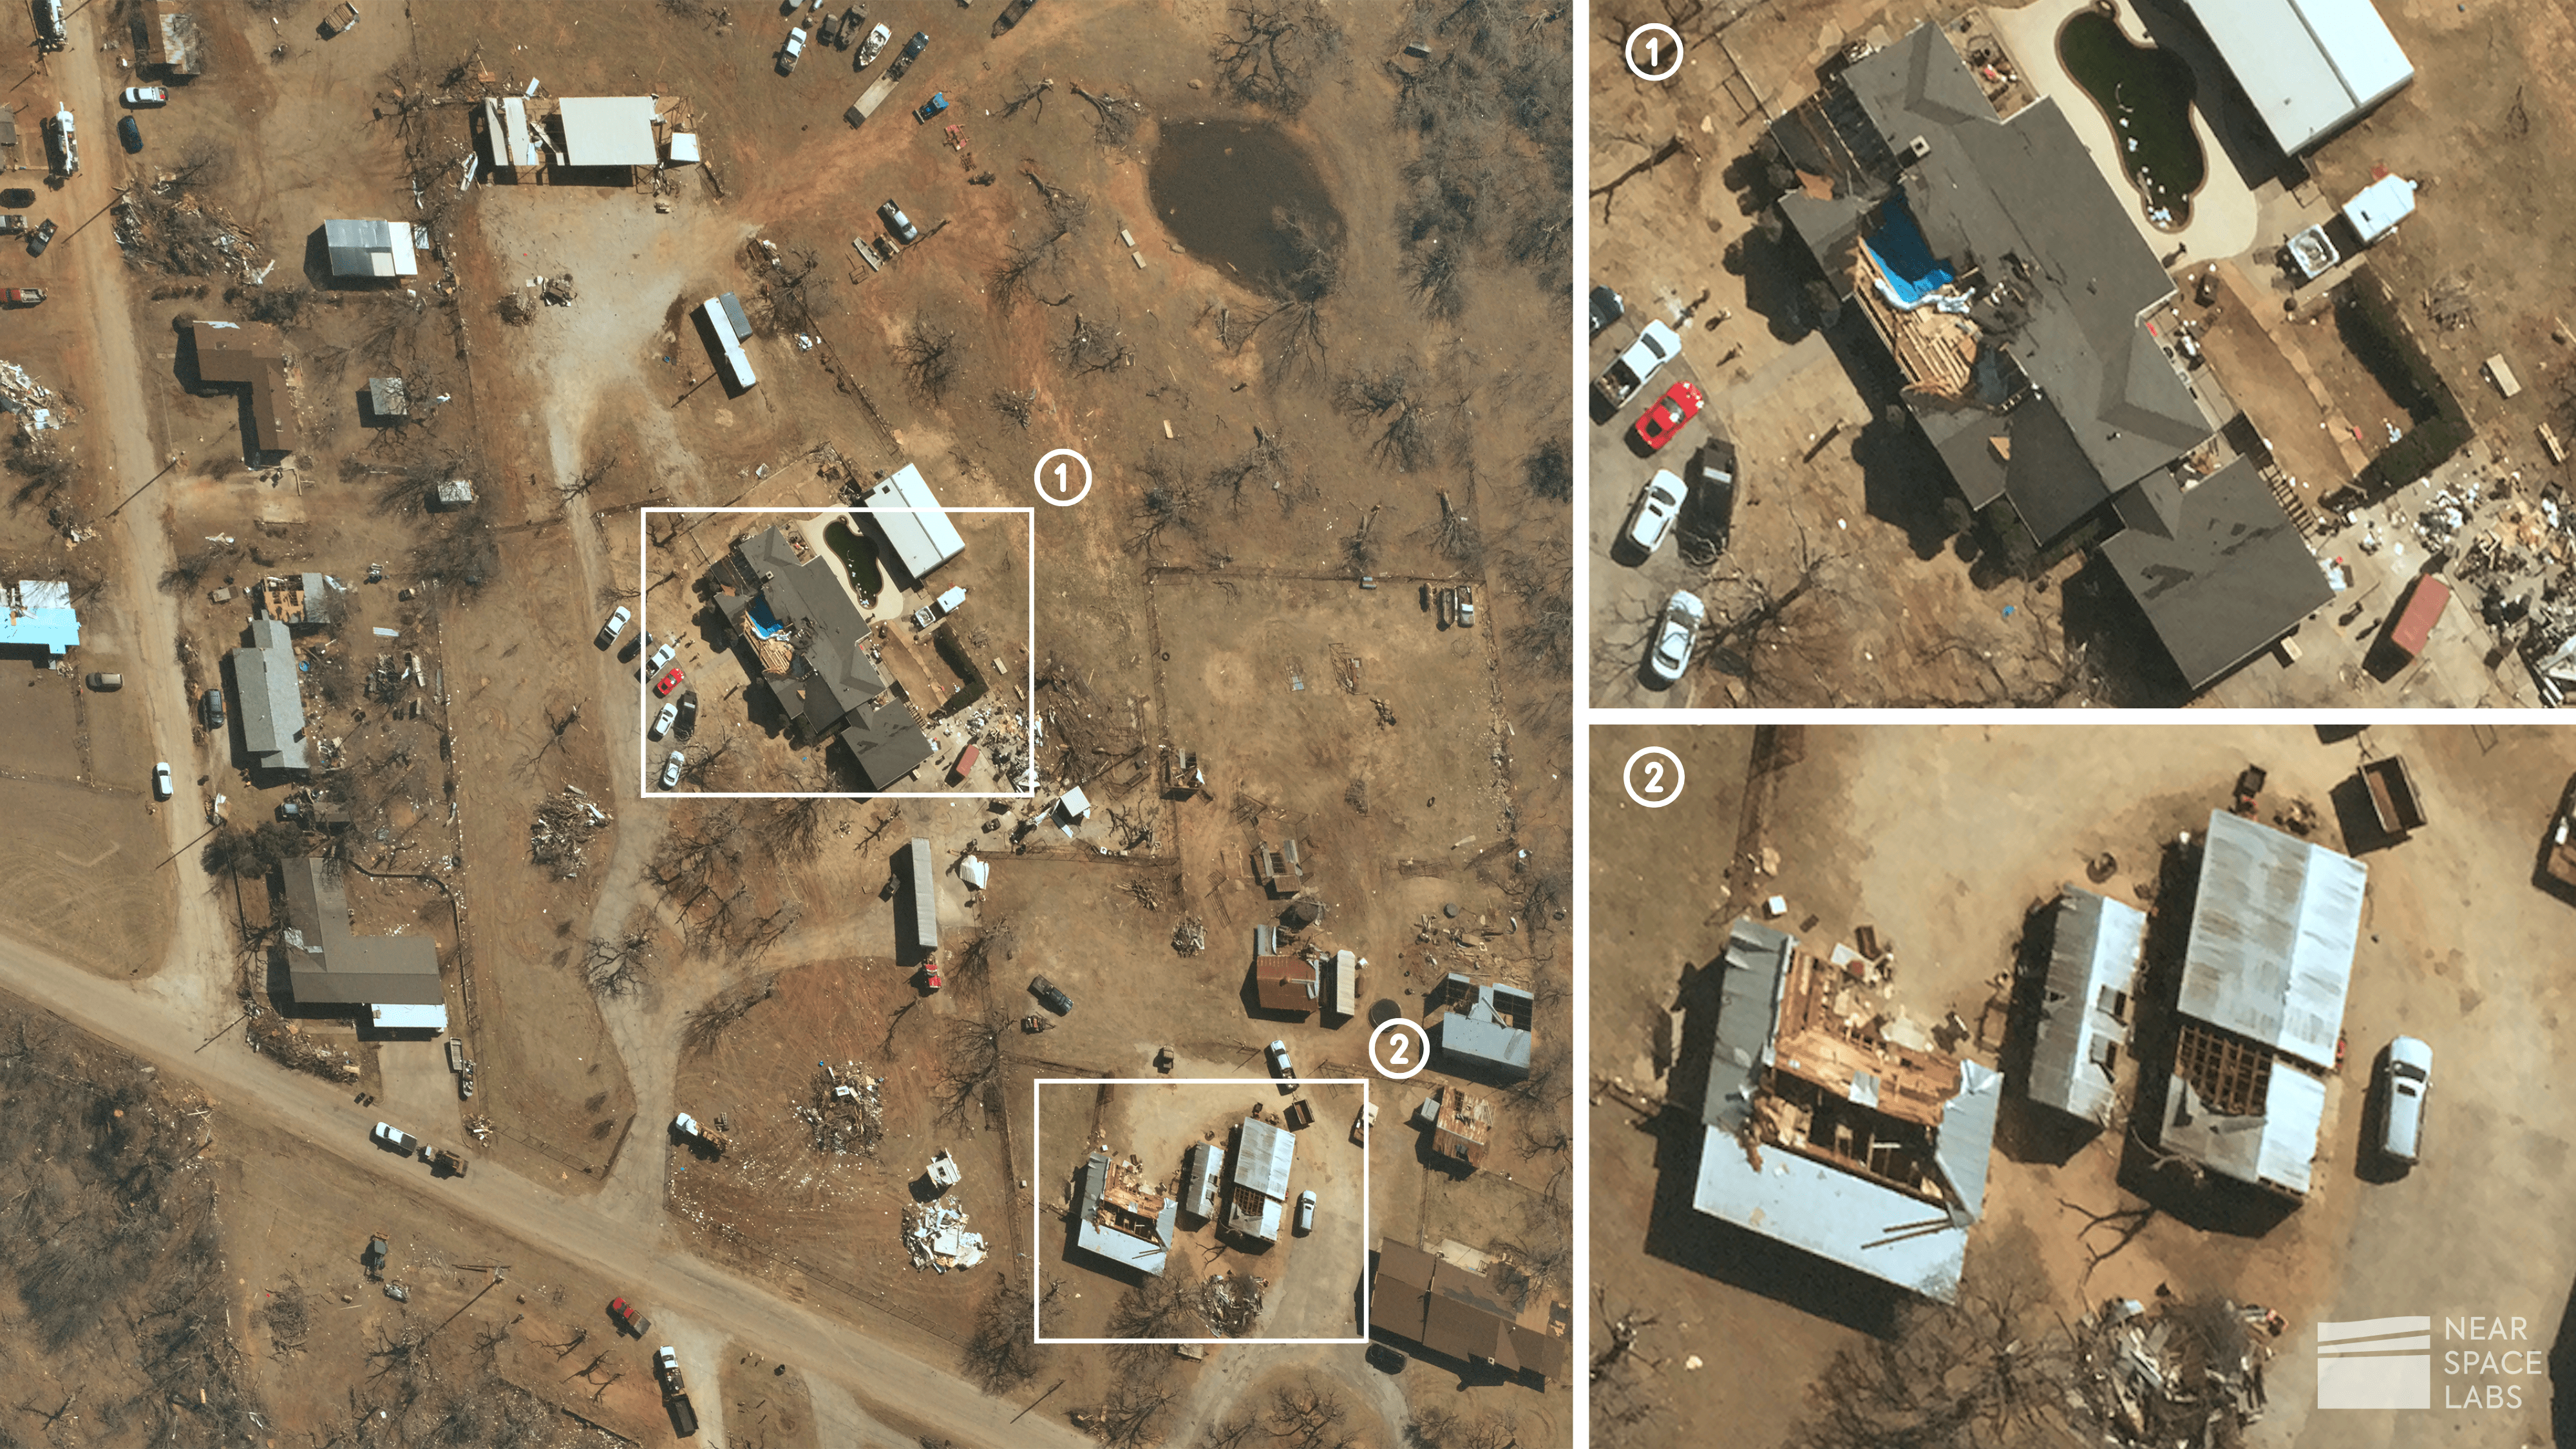 Near Space Labs 10 cm image of post-catastrophe capture. House and shed with roofing damage. 